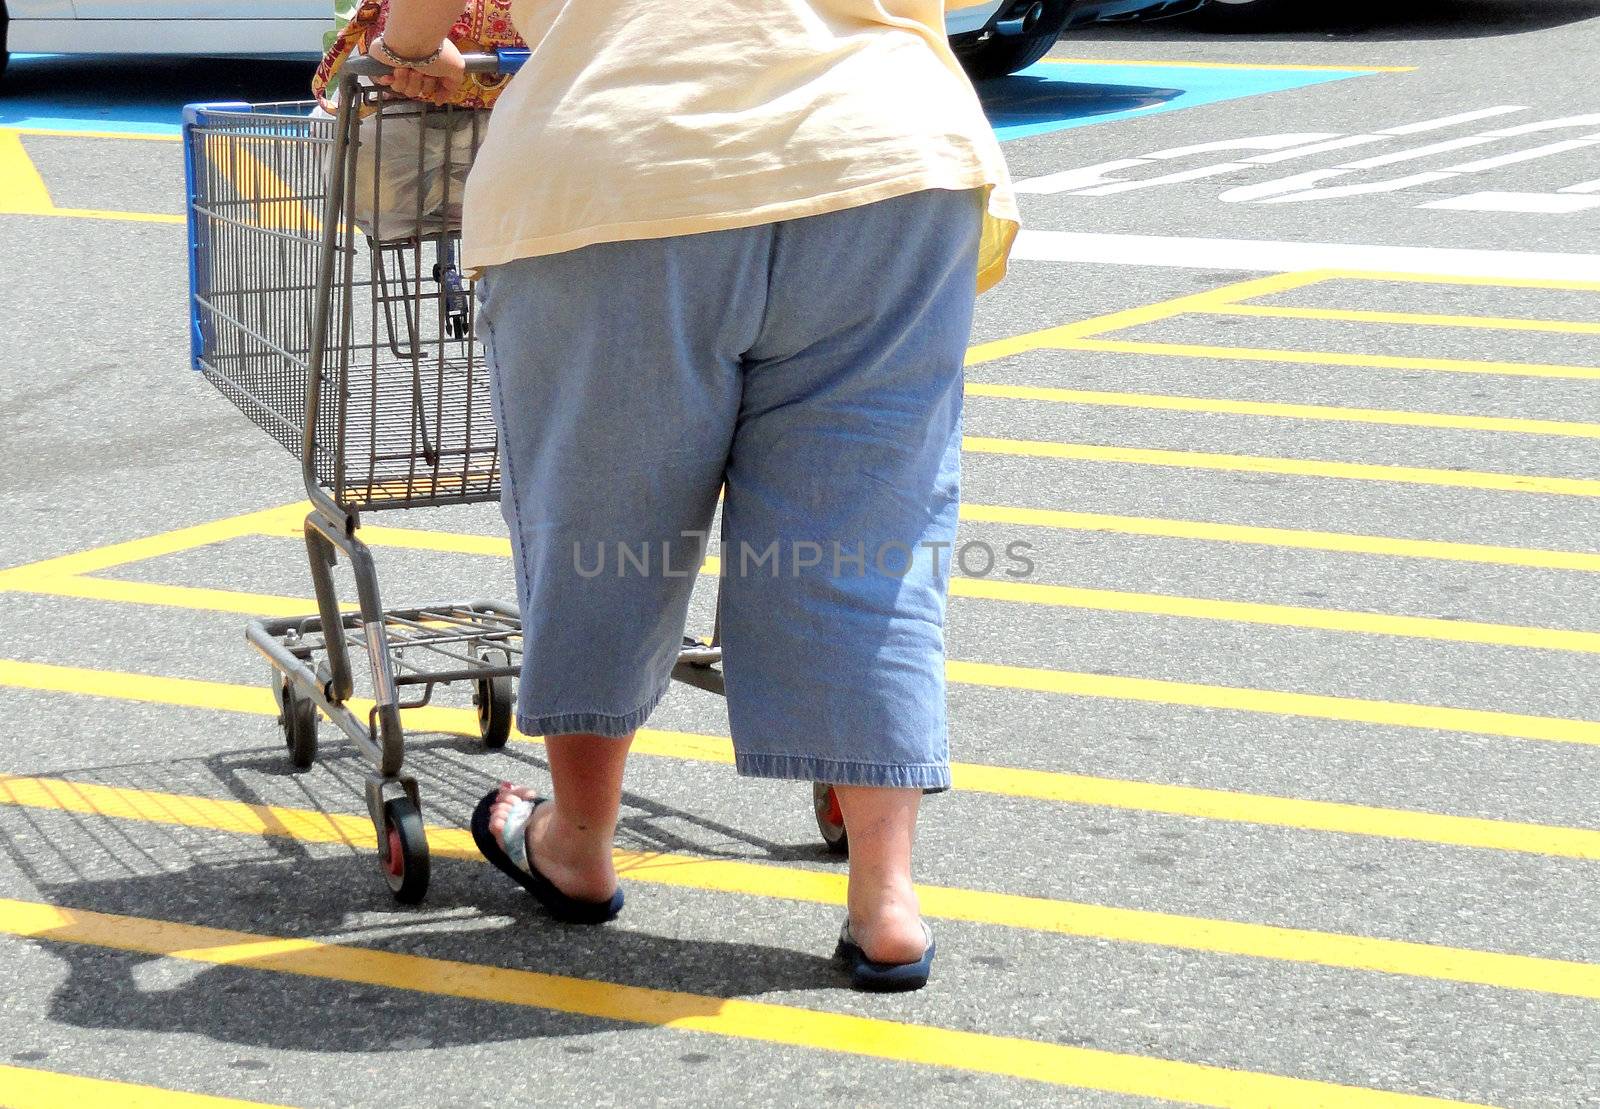 Overweight woman walking to her car in the shopping center.